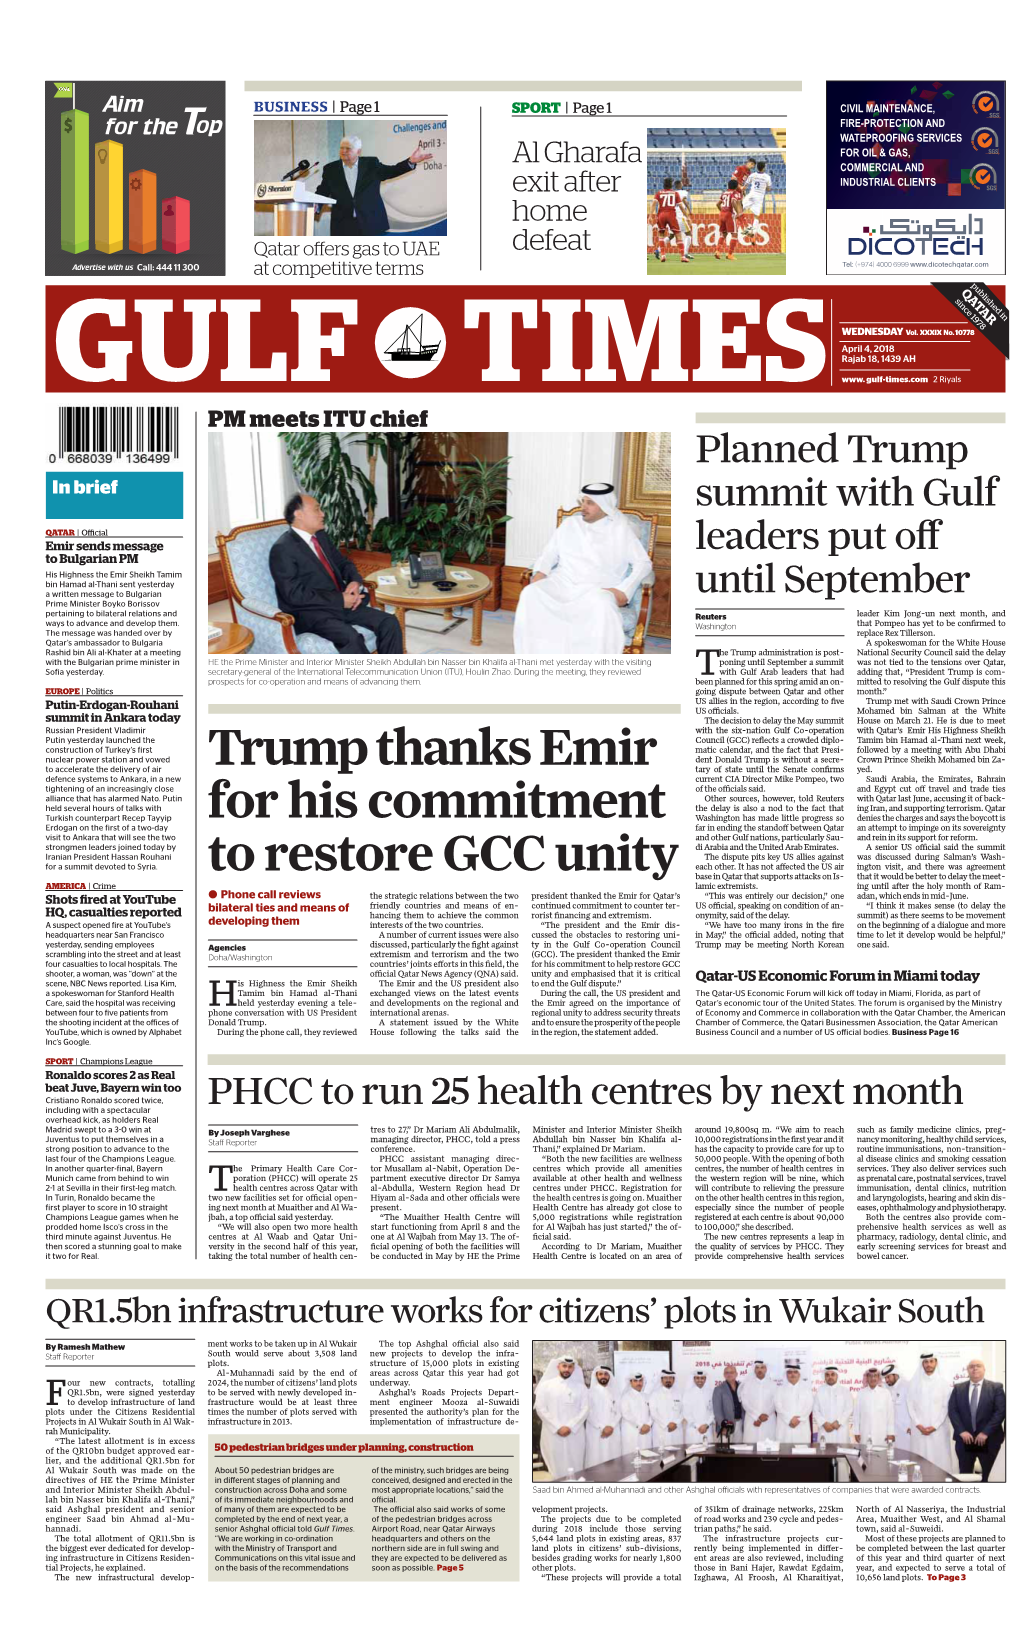 Trump Thanks Emir for His Commitment to Restore GCC Unity